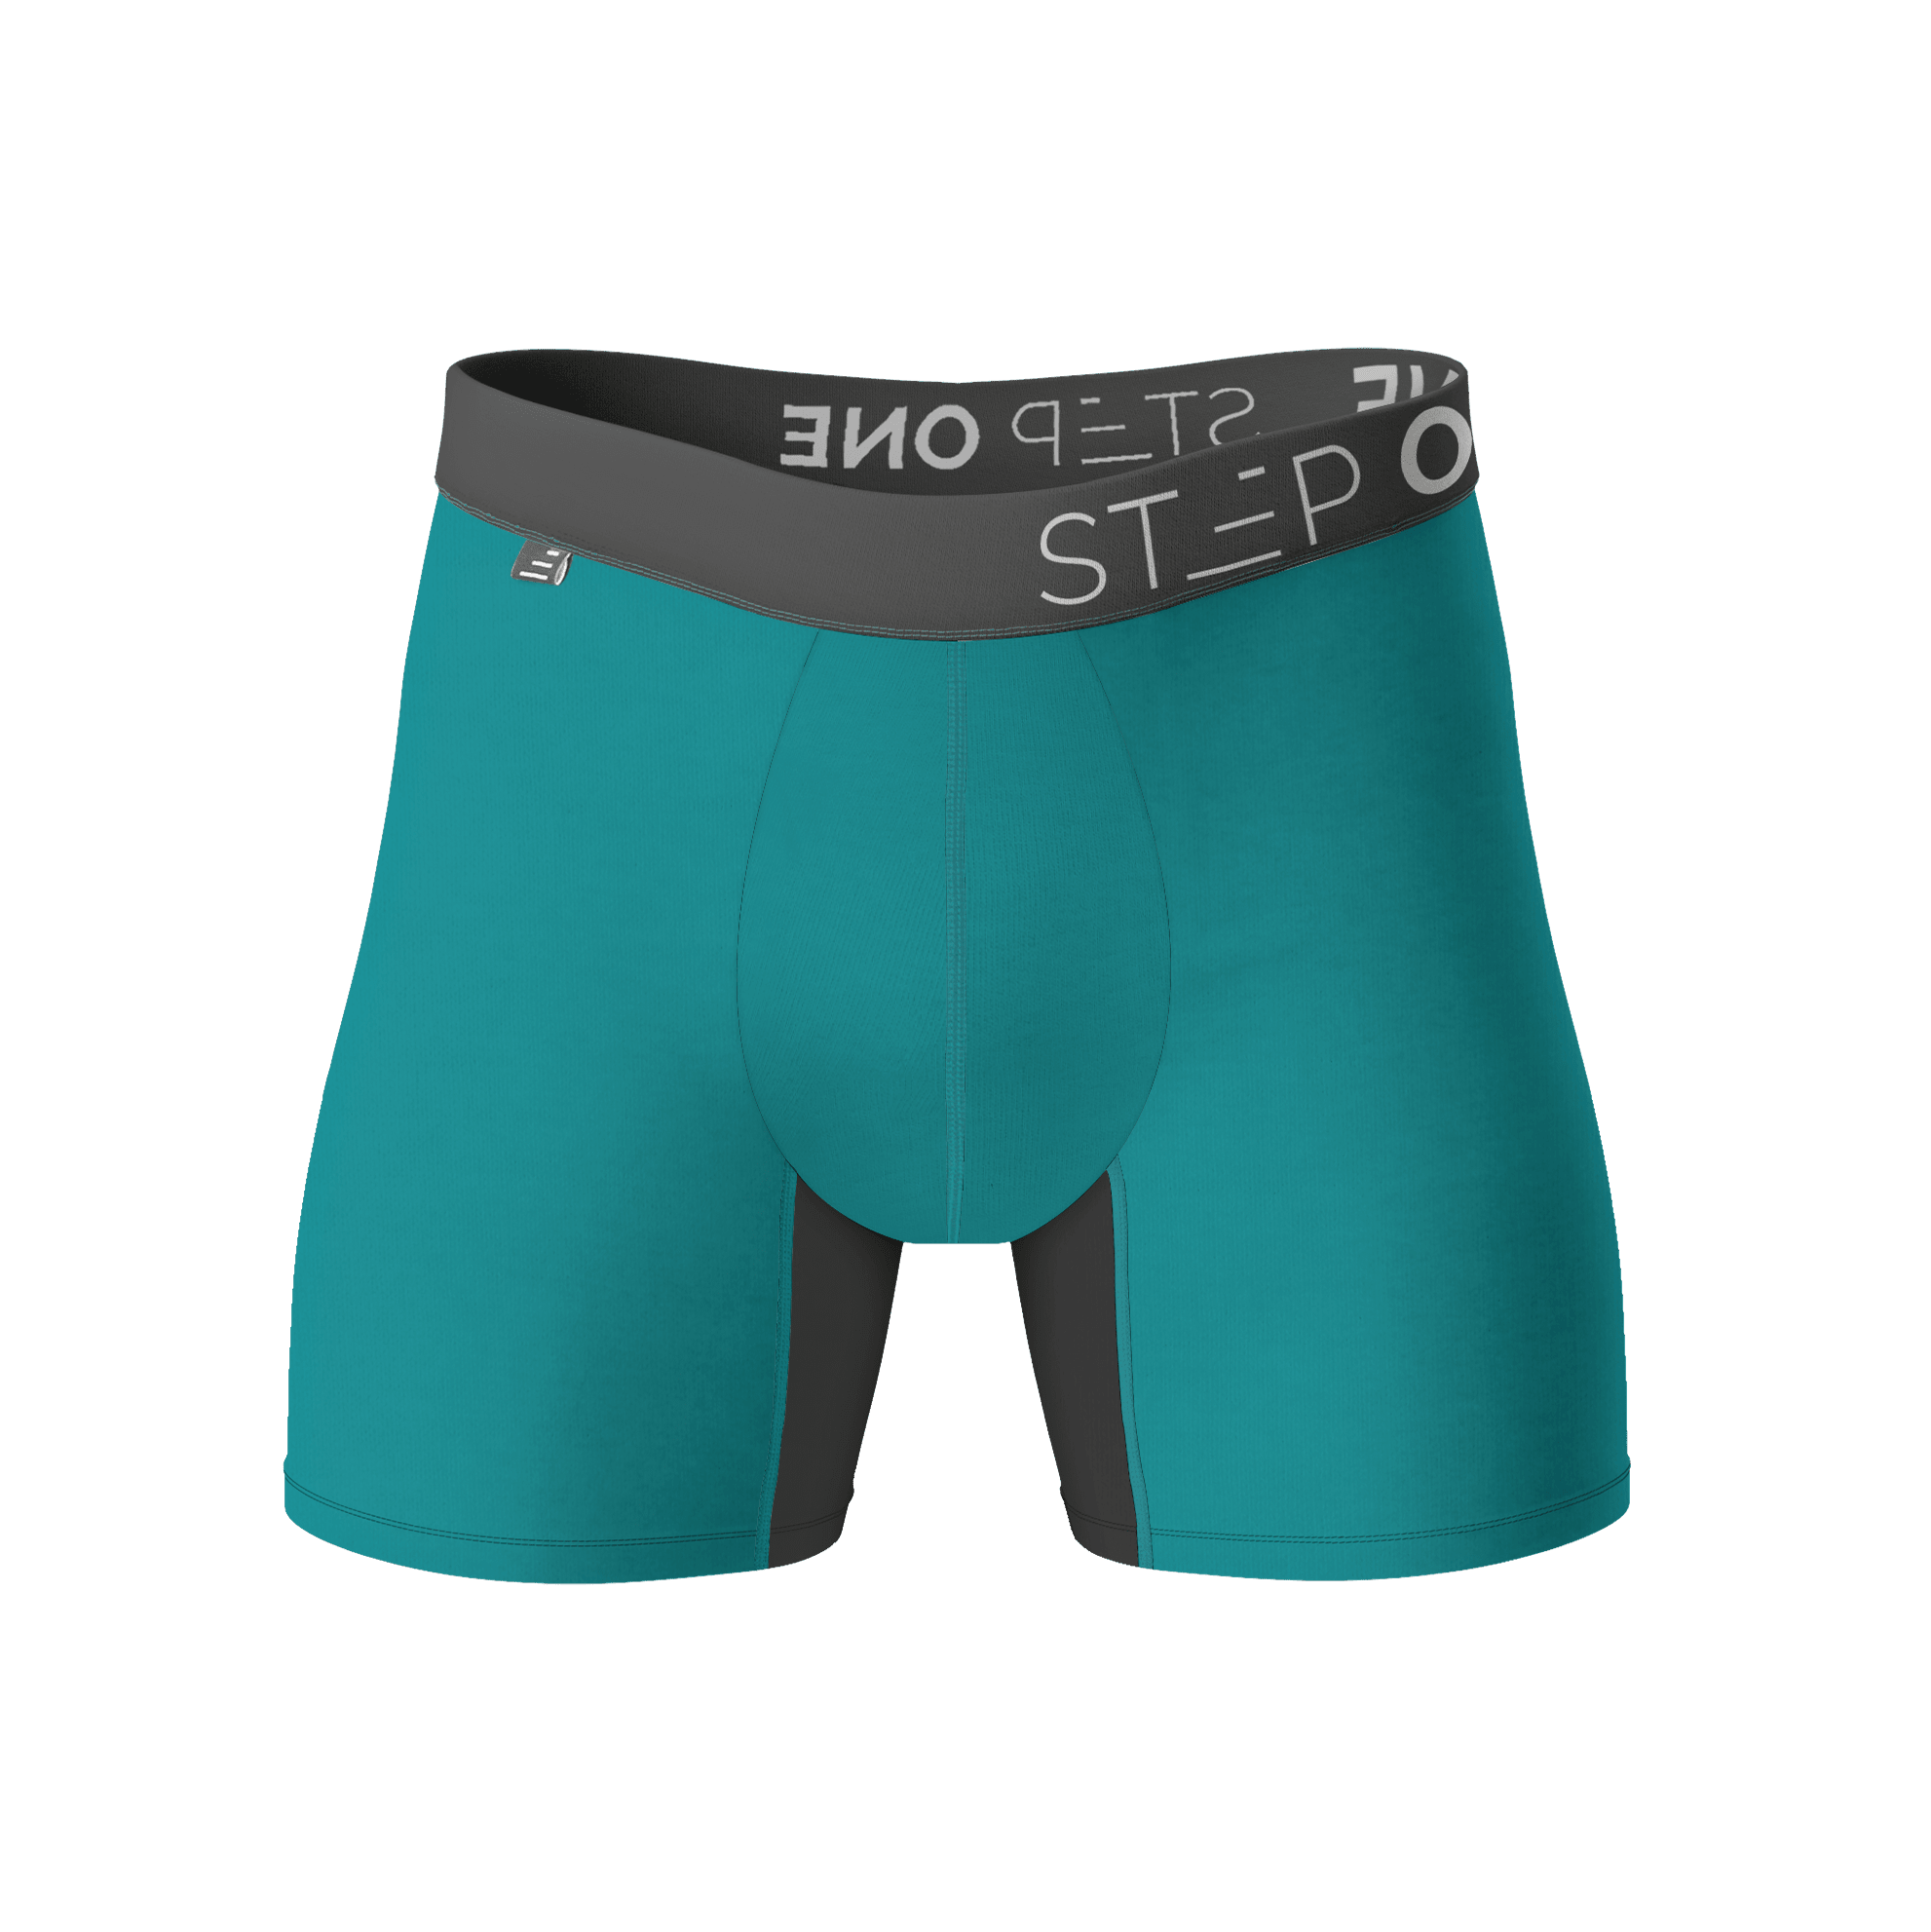 Boxer Brief - Smashed Avo  Step One Men's Bamboo Underwear